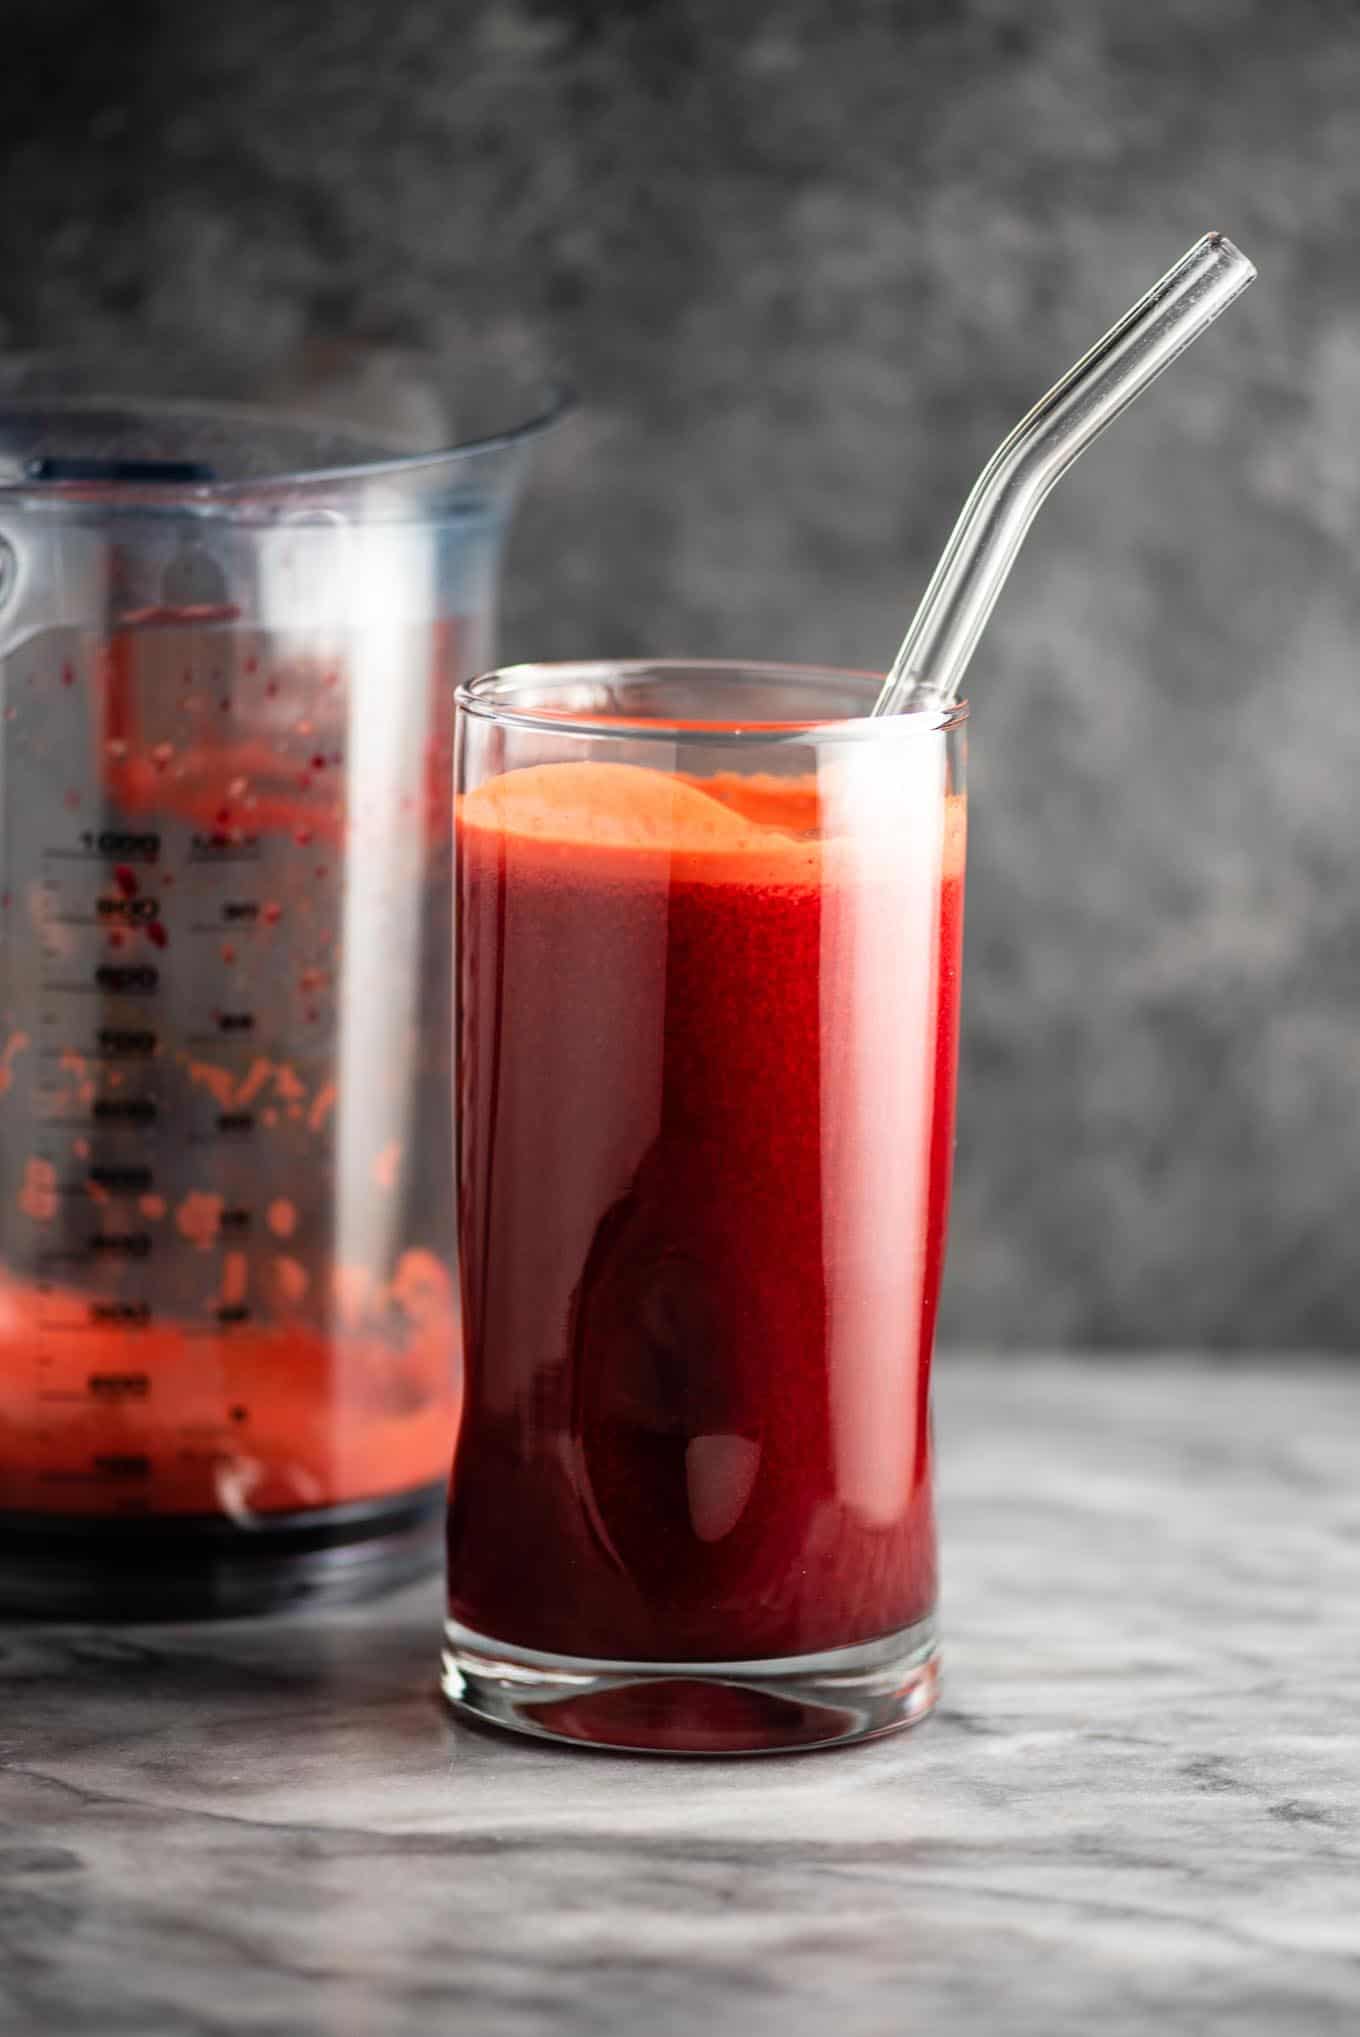 beet and carrot juice in a glass next to a juicer